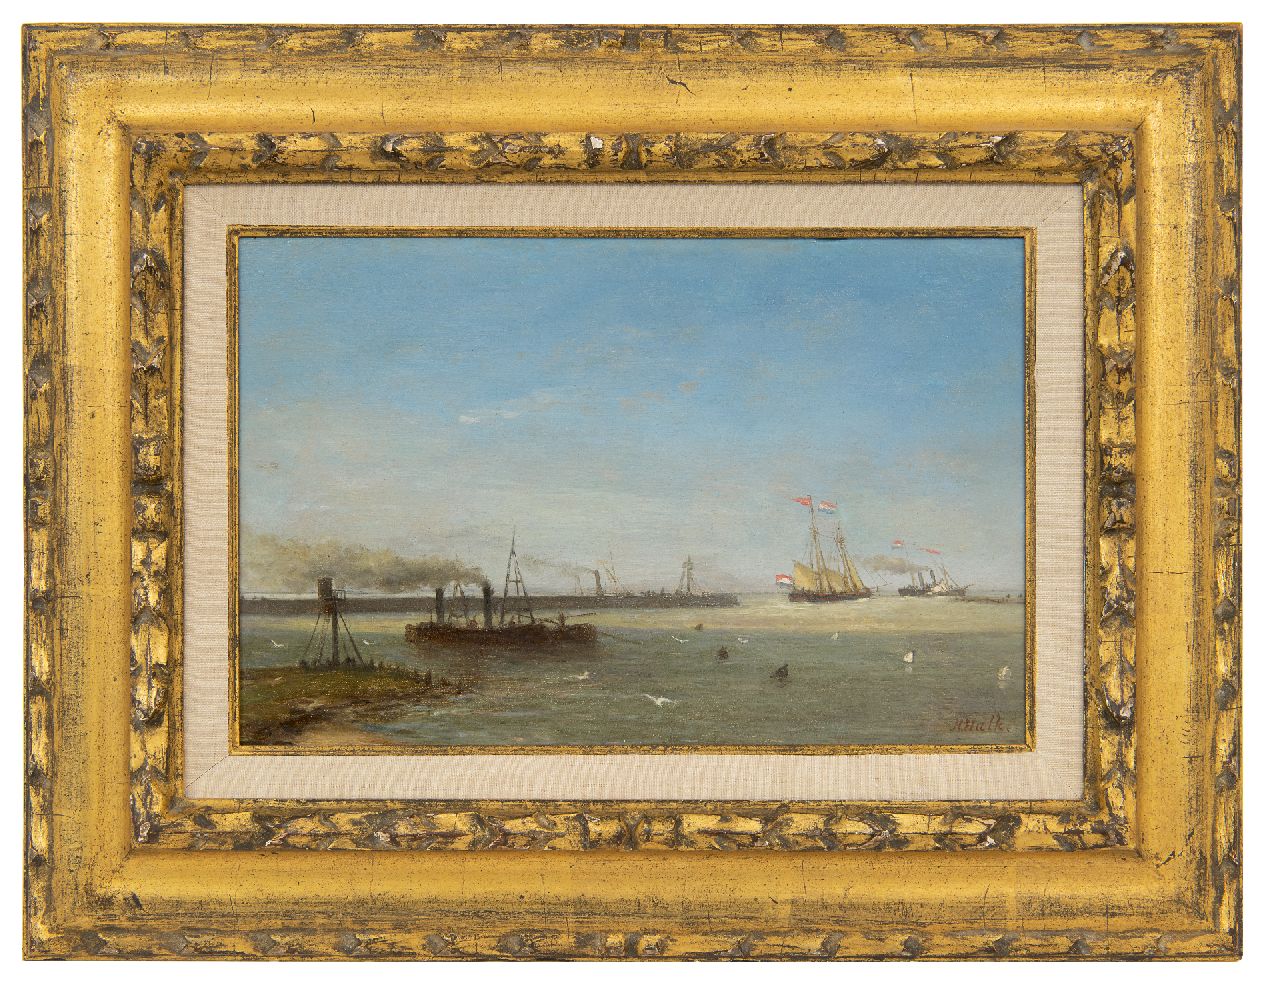 Hulk H.  | Hendrik Hulk | Paintings offered for sale | A jetty with sailing ship and steamer, oil on panel 17.3 x 26.8 cm, signed l.r.